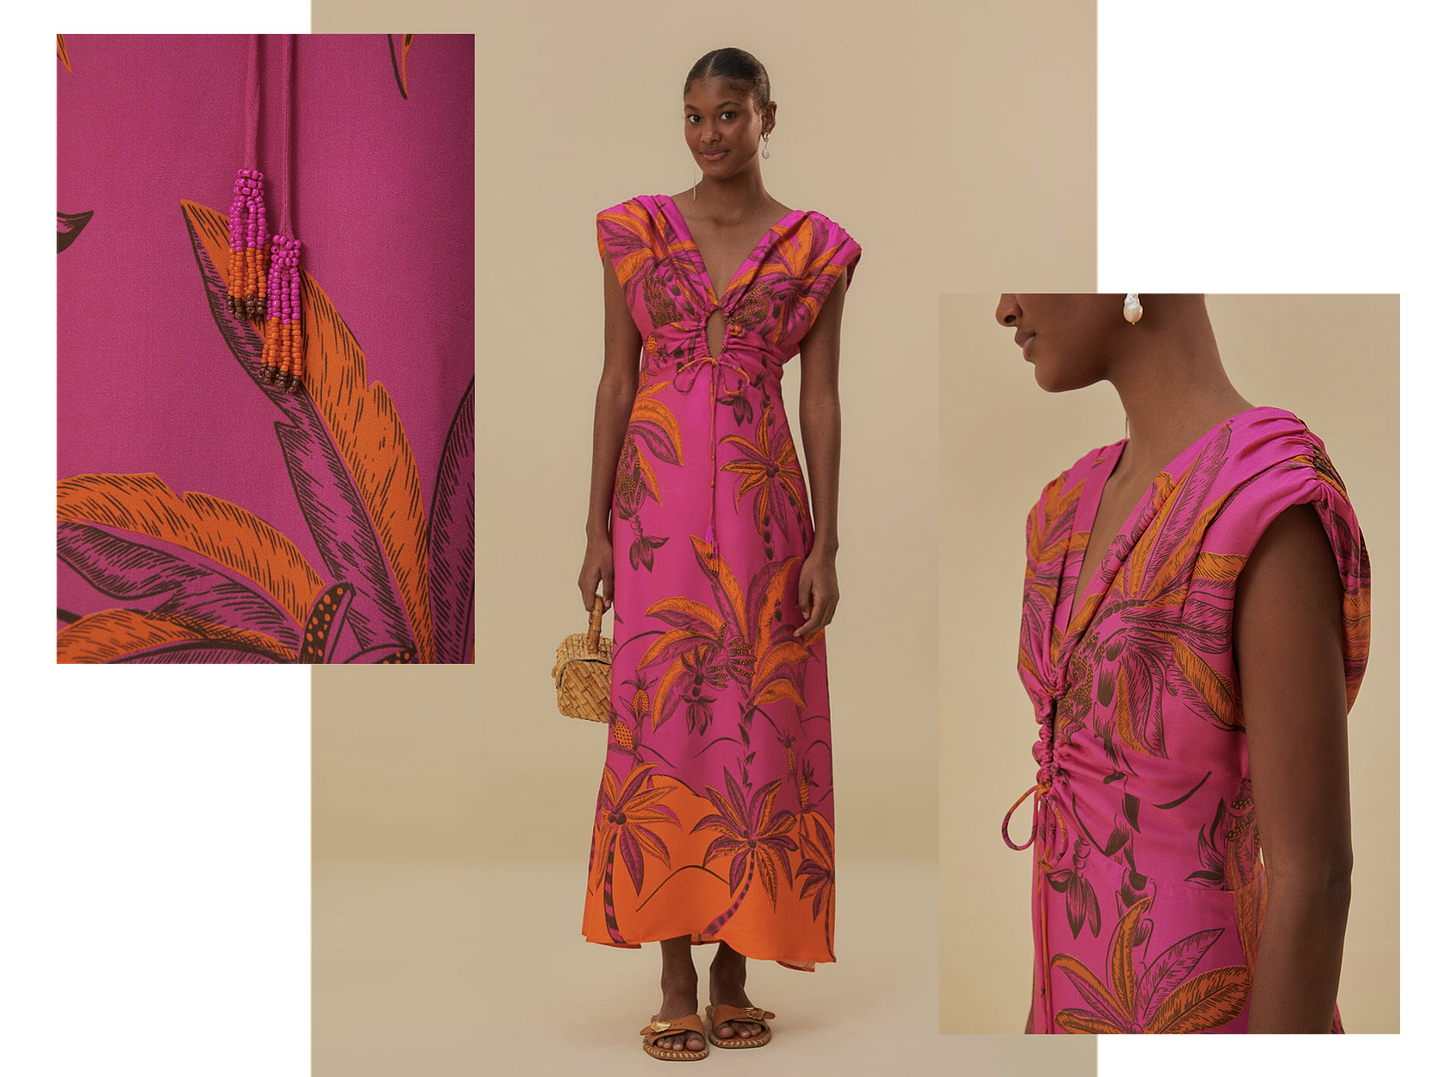 Images of a pink and orange Farm Rio sundress.